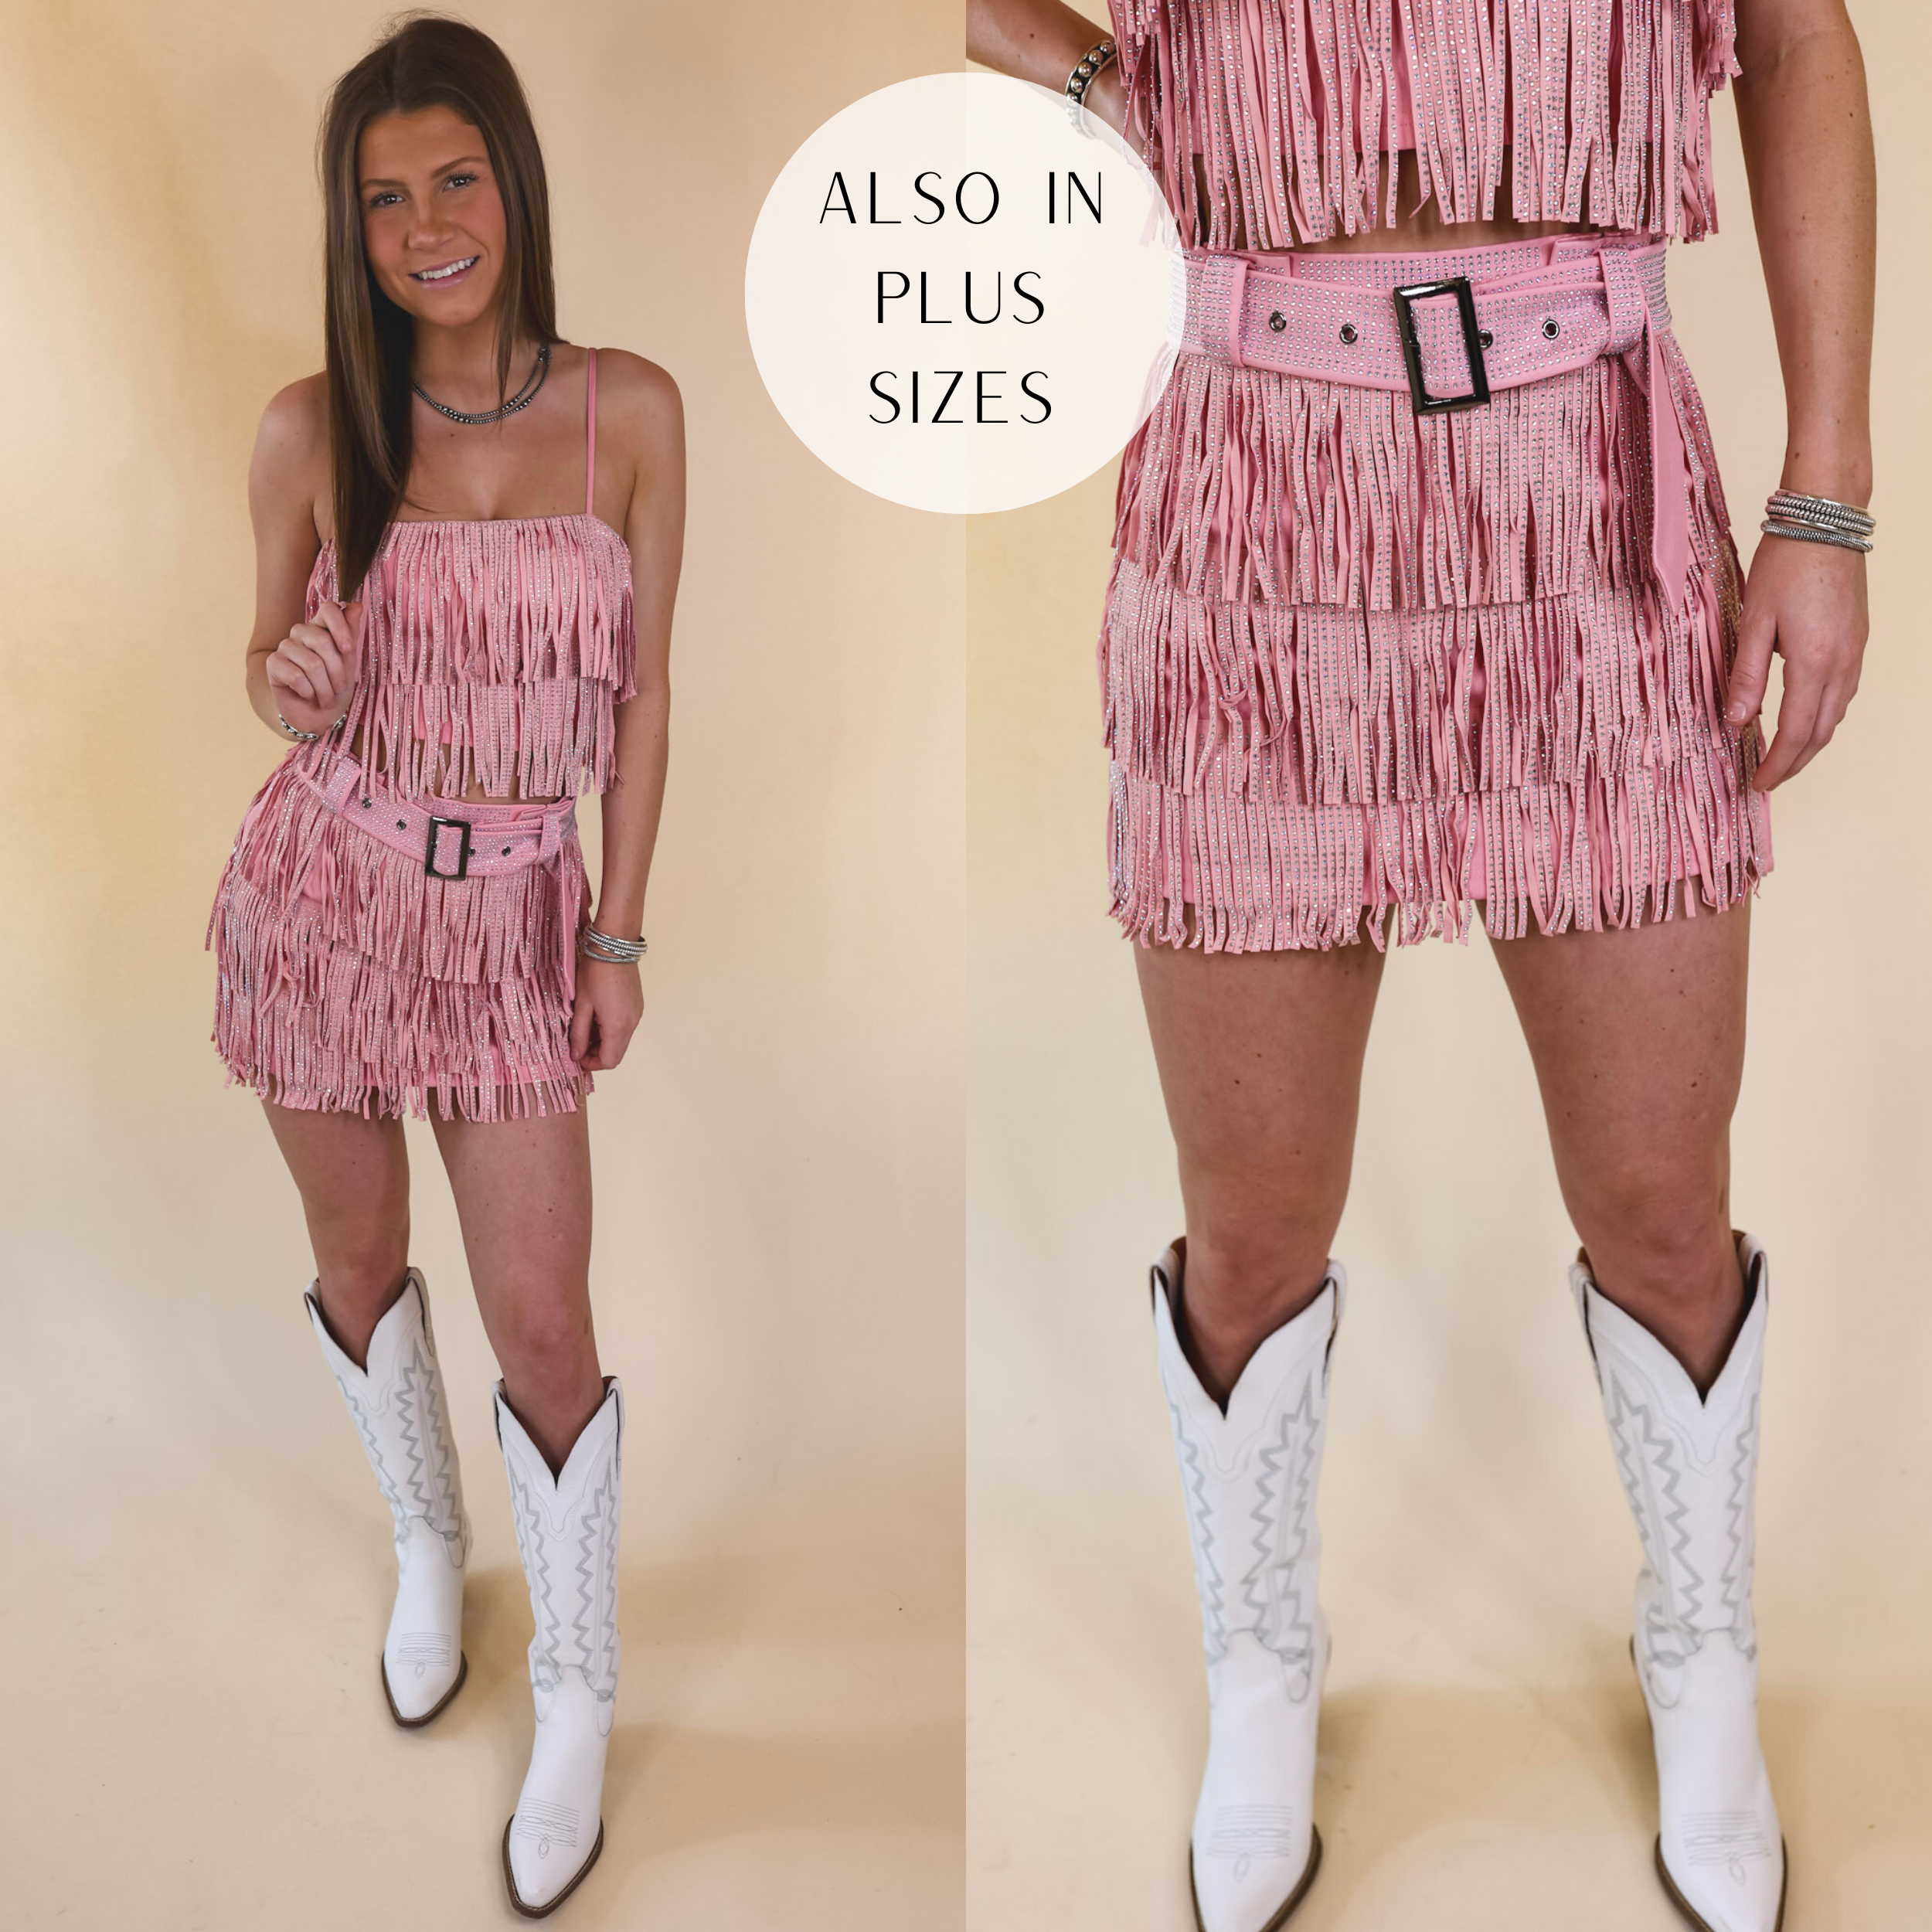 Model is wearing a crystal fringe skort with a matching top in light pink. Model has this set paired with white boots and Navajo jewelry. Background is solid tan.